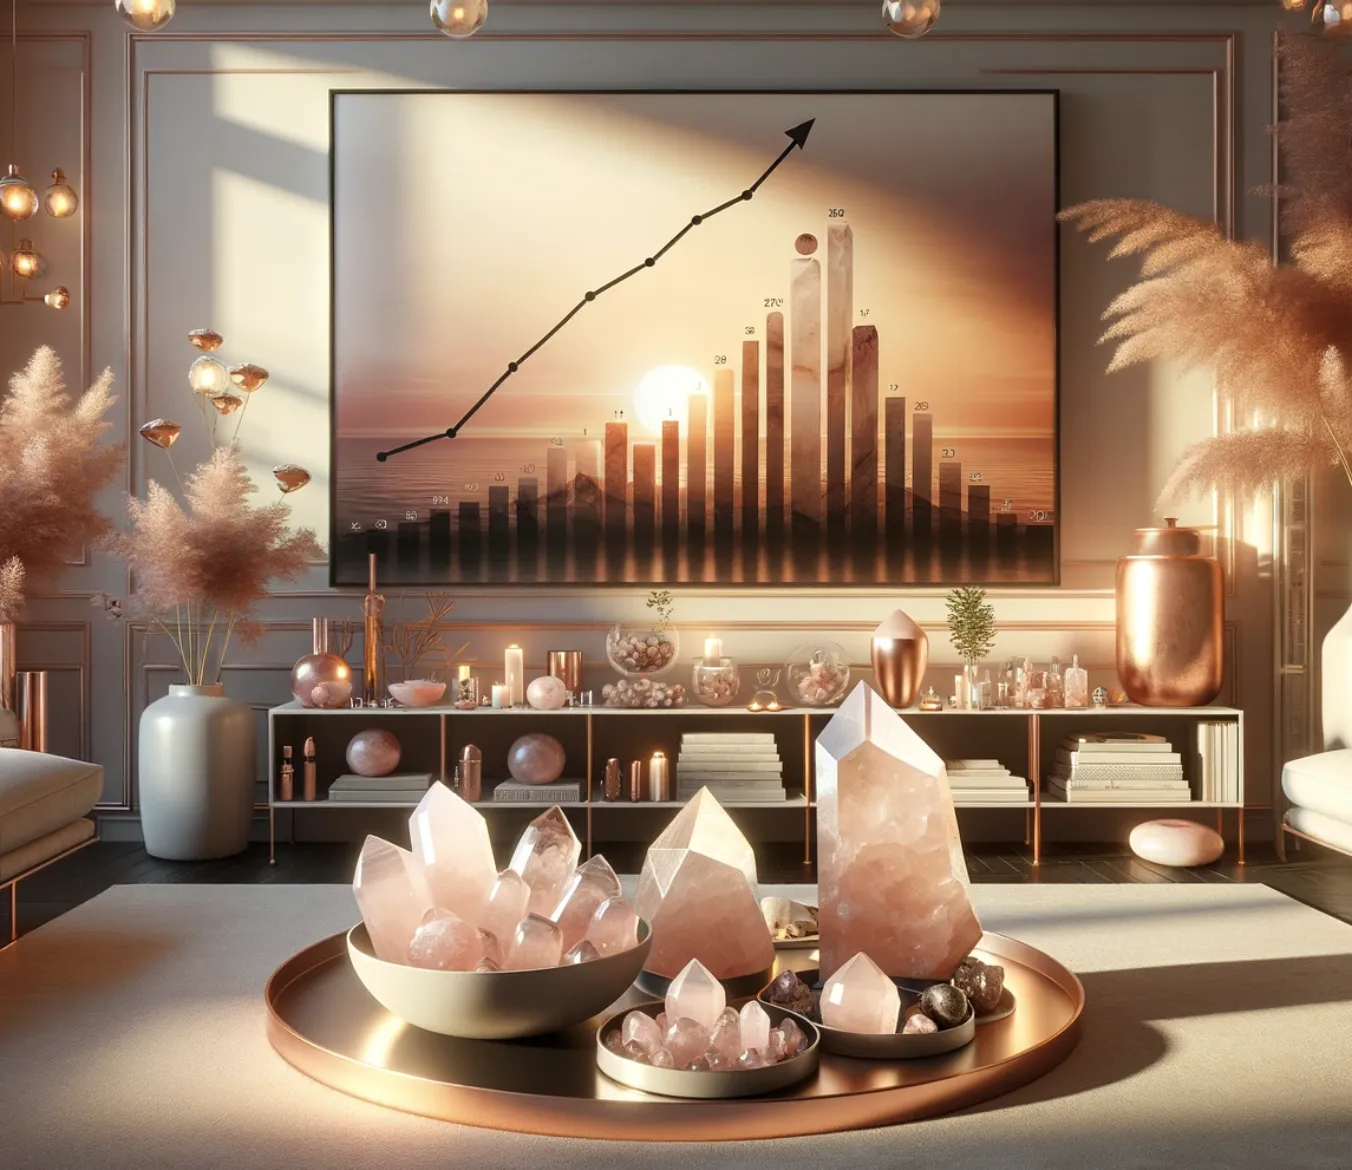 image showing a room filled with rose quartz and a bar chart on the wall depicting its increasing popularity